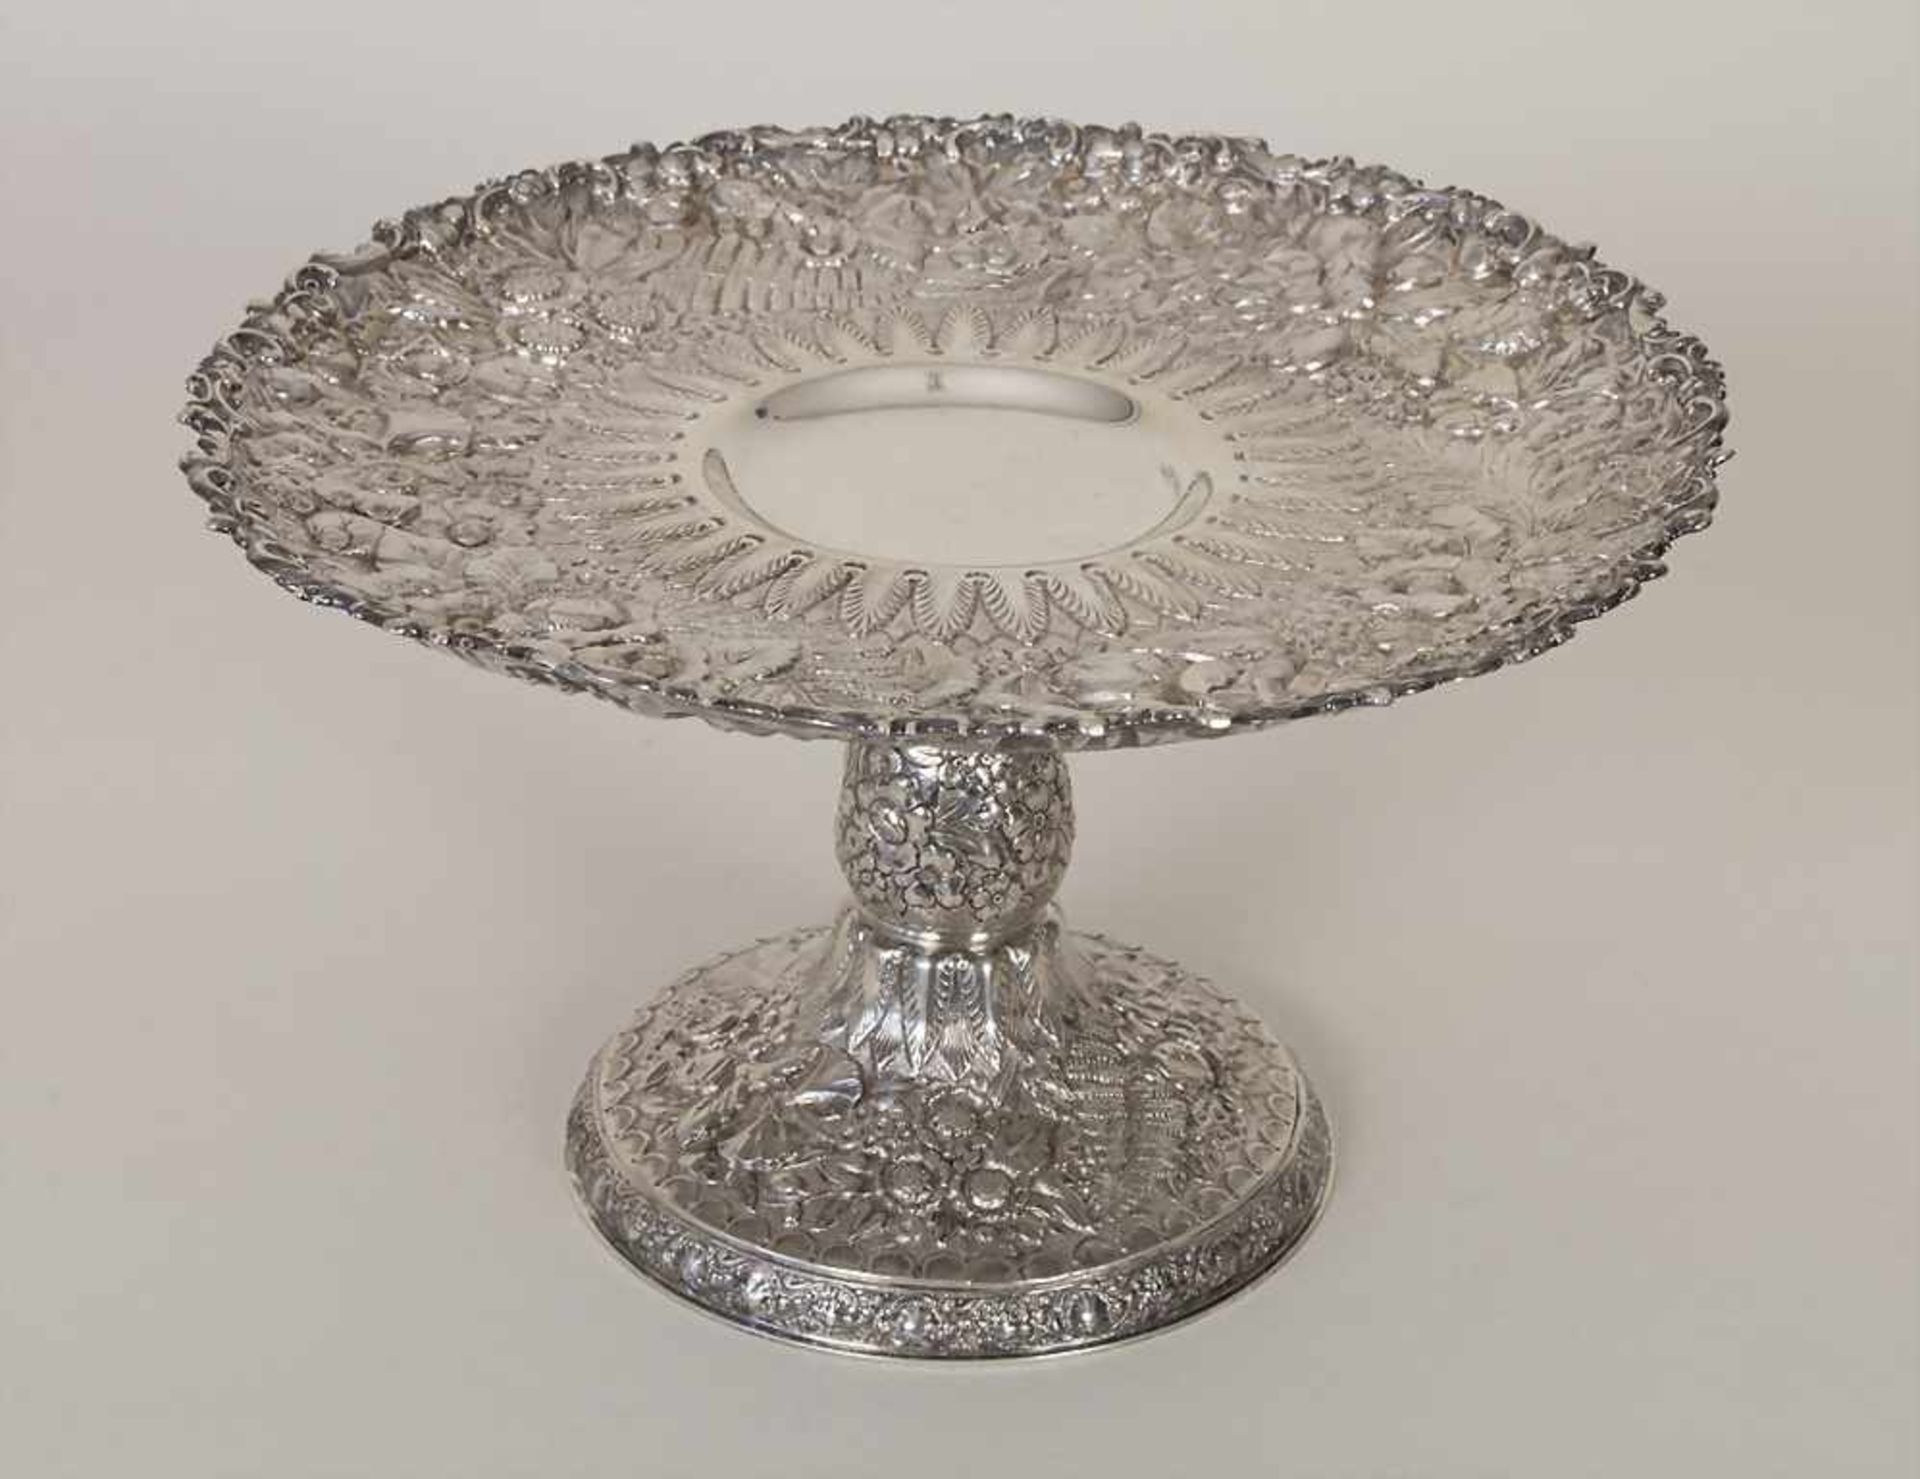 Obstschale / Fußschale / A silver footed fruit dish, Tiffany & Co., New York, 20. Jh.Material: